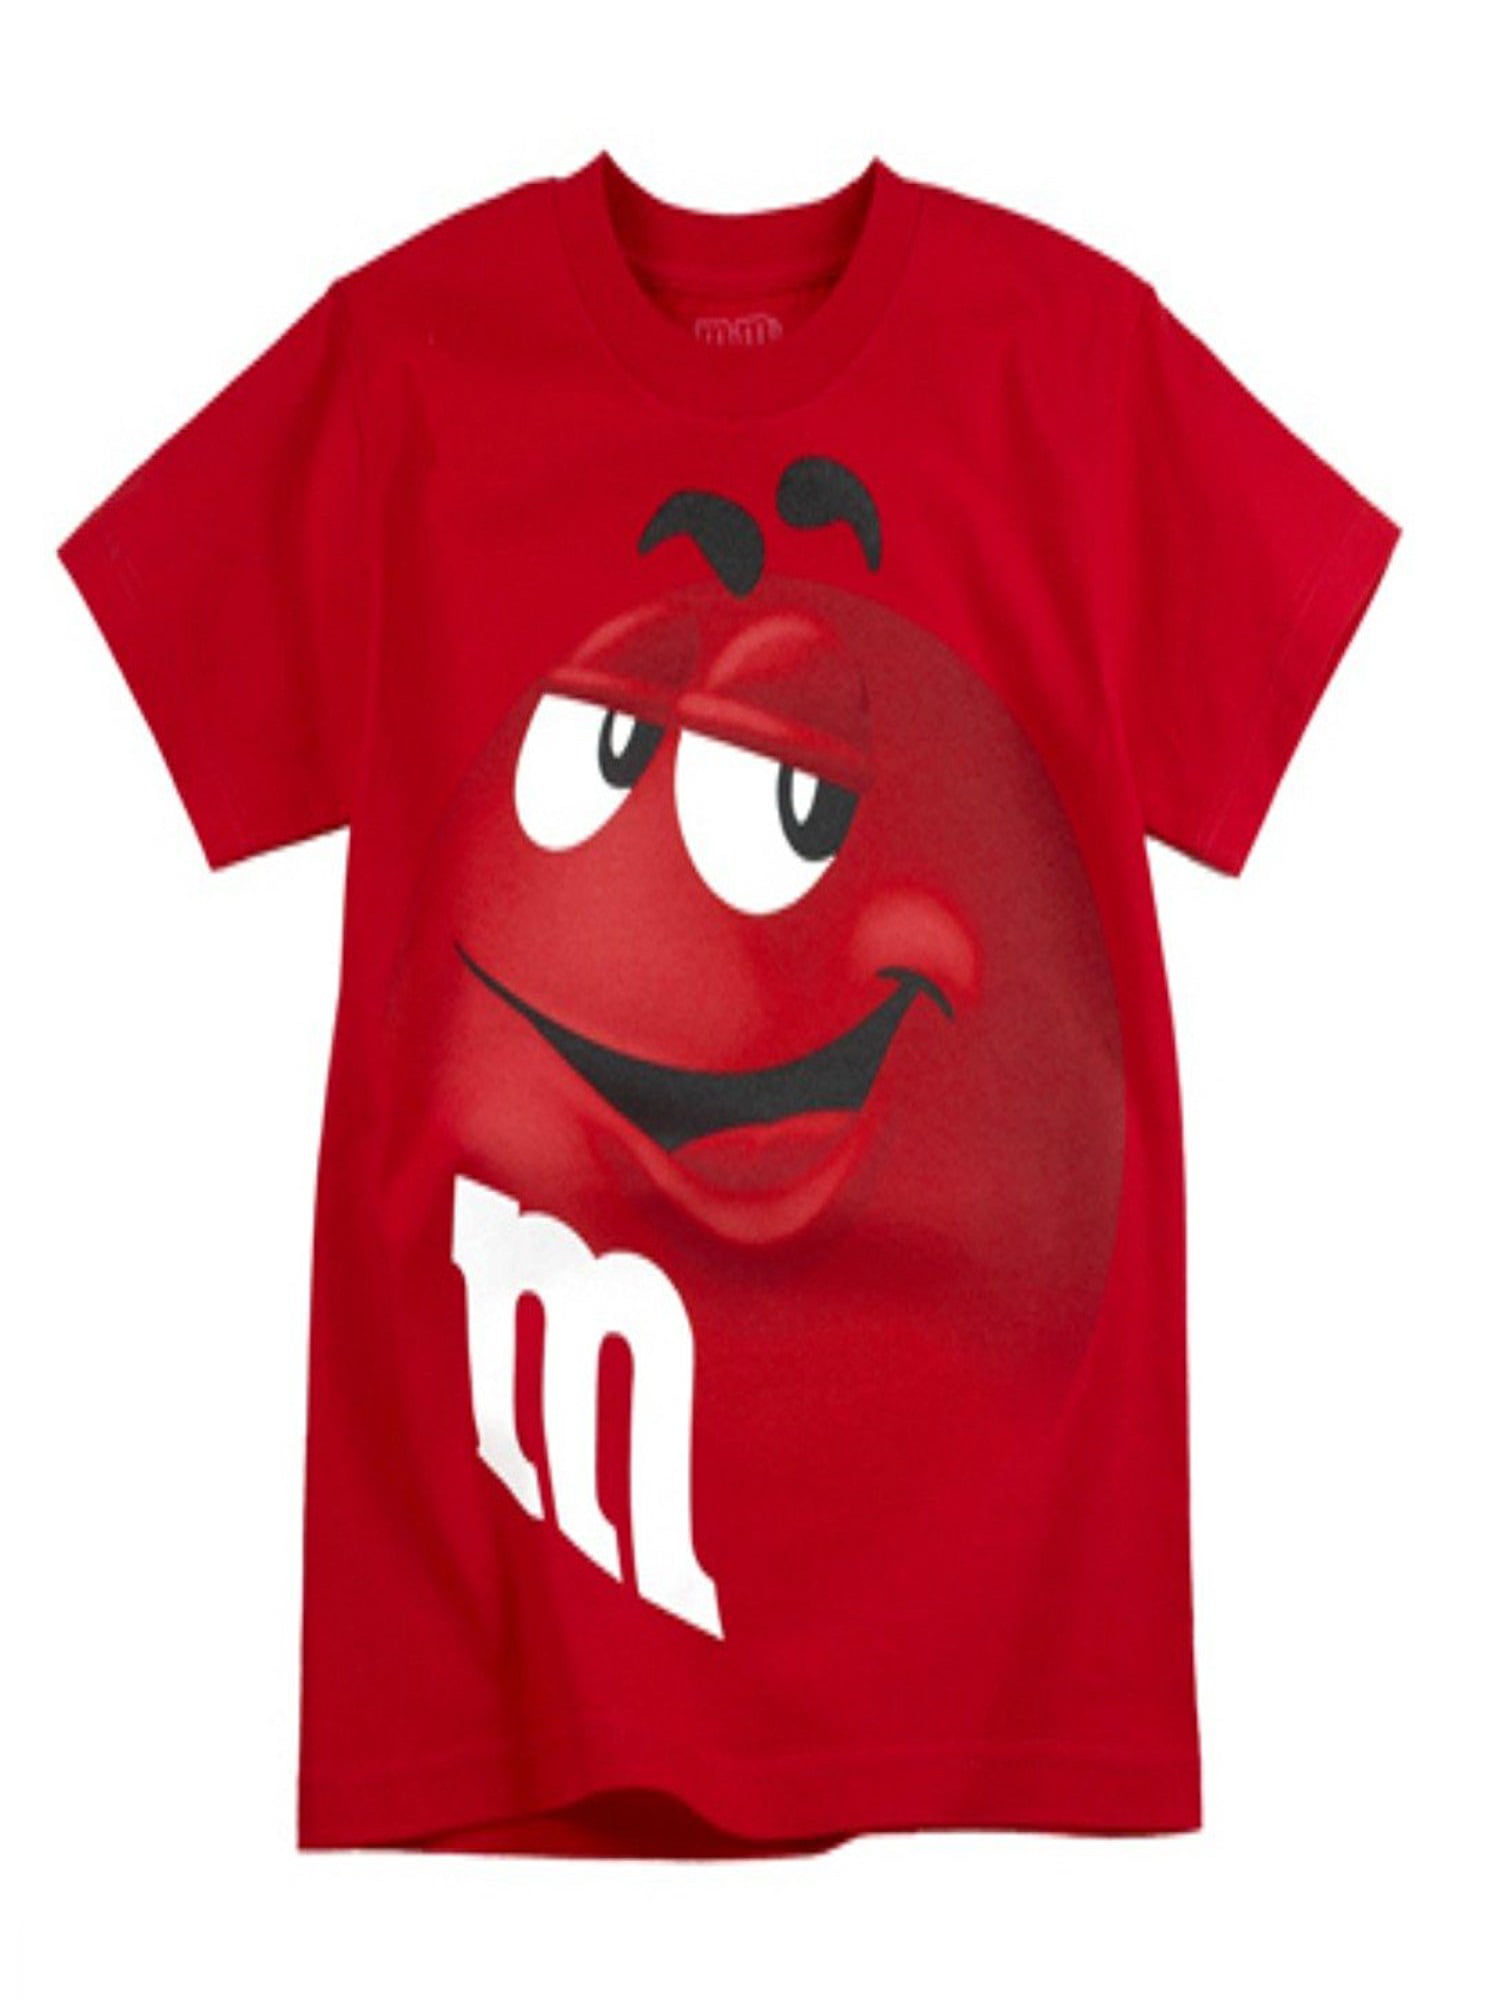 M&M M&M's Candy Silly Character Face T-Shirt (Small, Red Left Smile ...